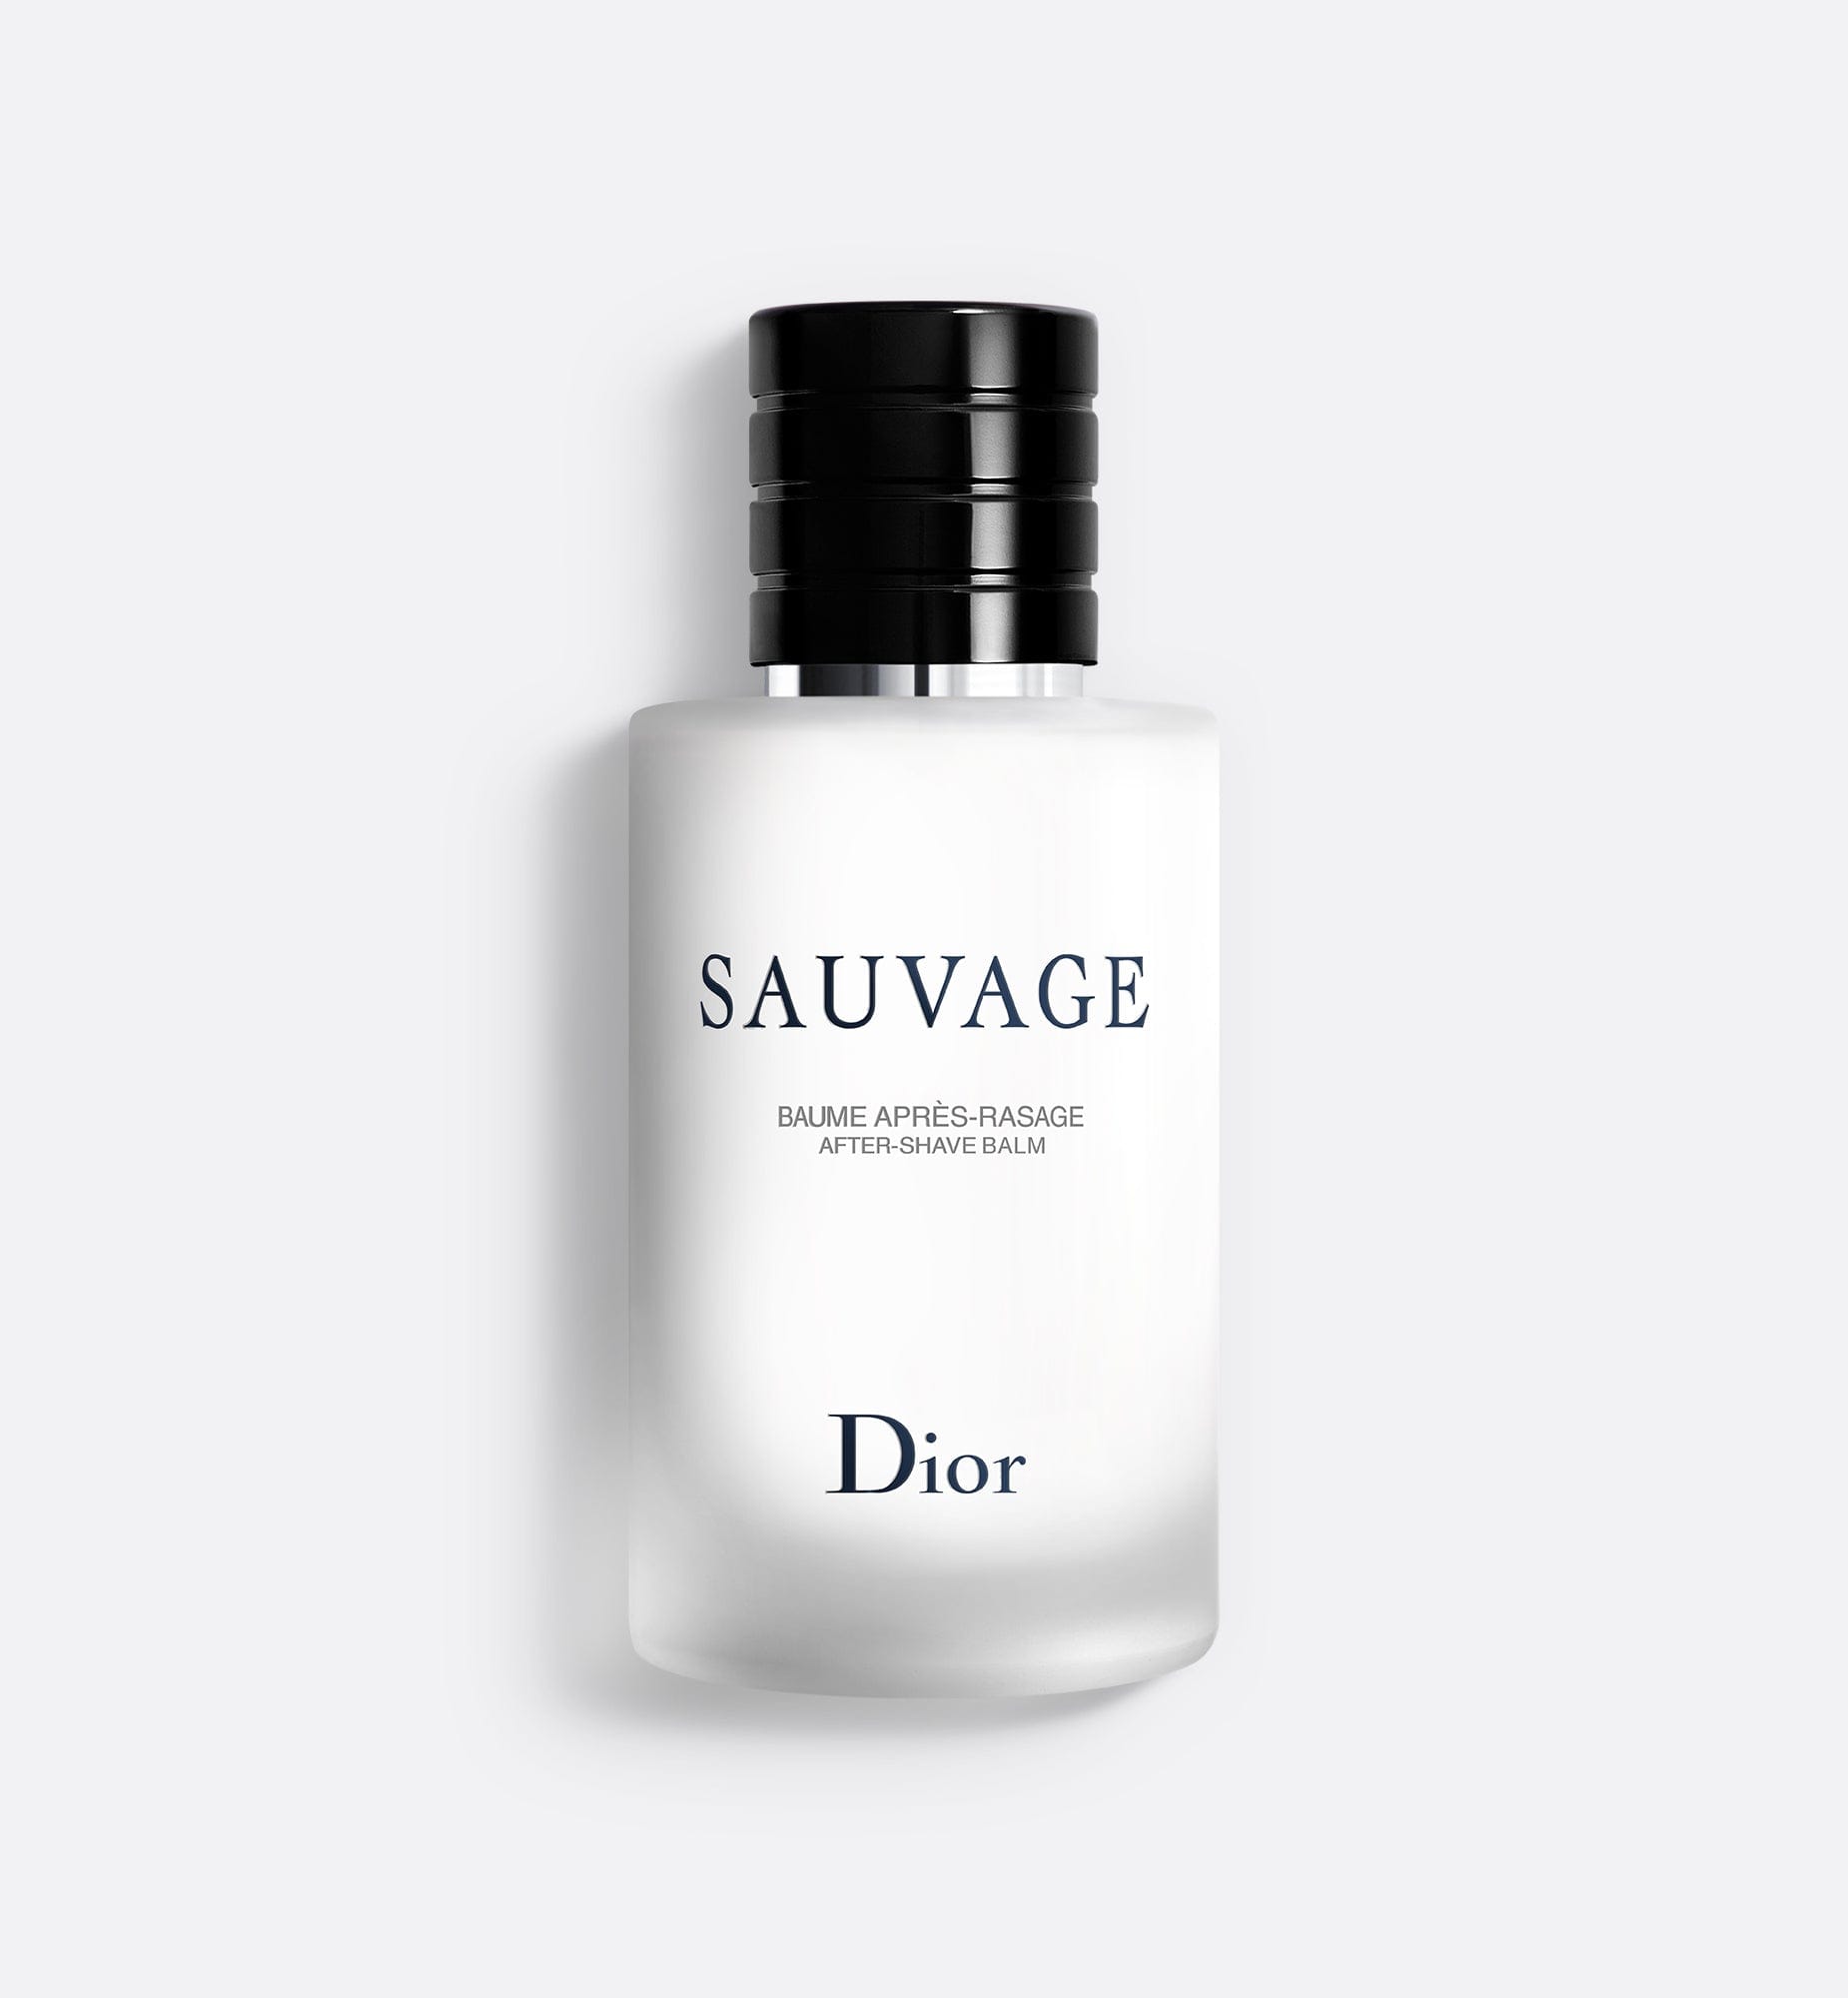 Sauvage After-Shave Balm | After-Shave Balm - Moisturizes and Soothes